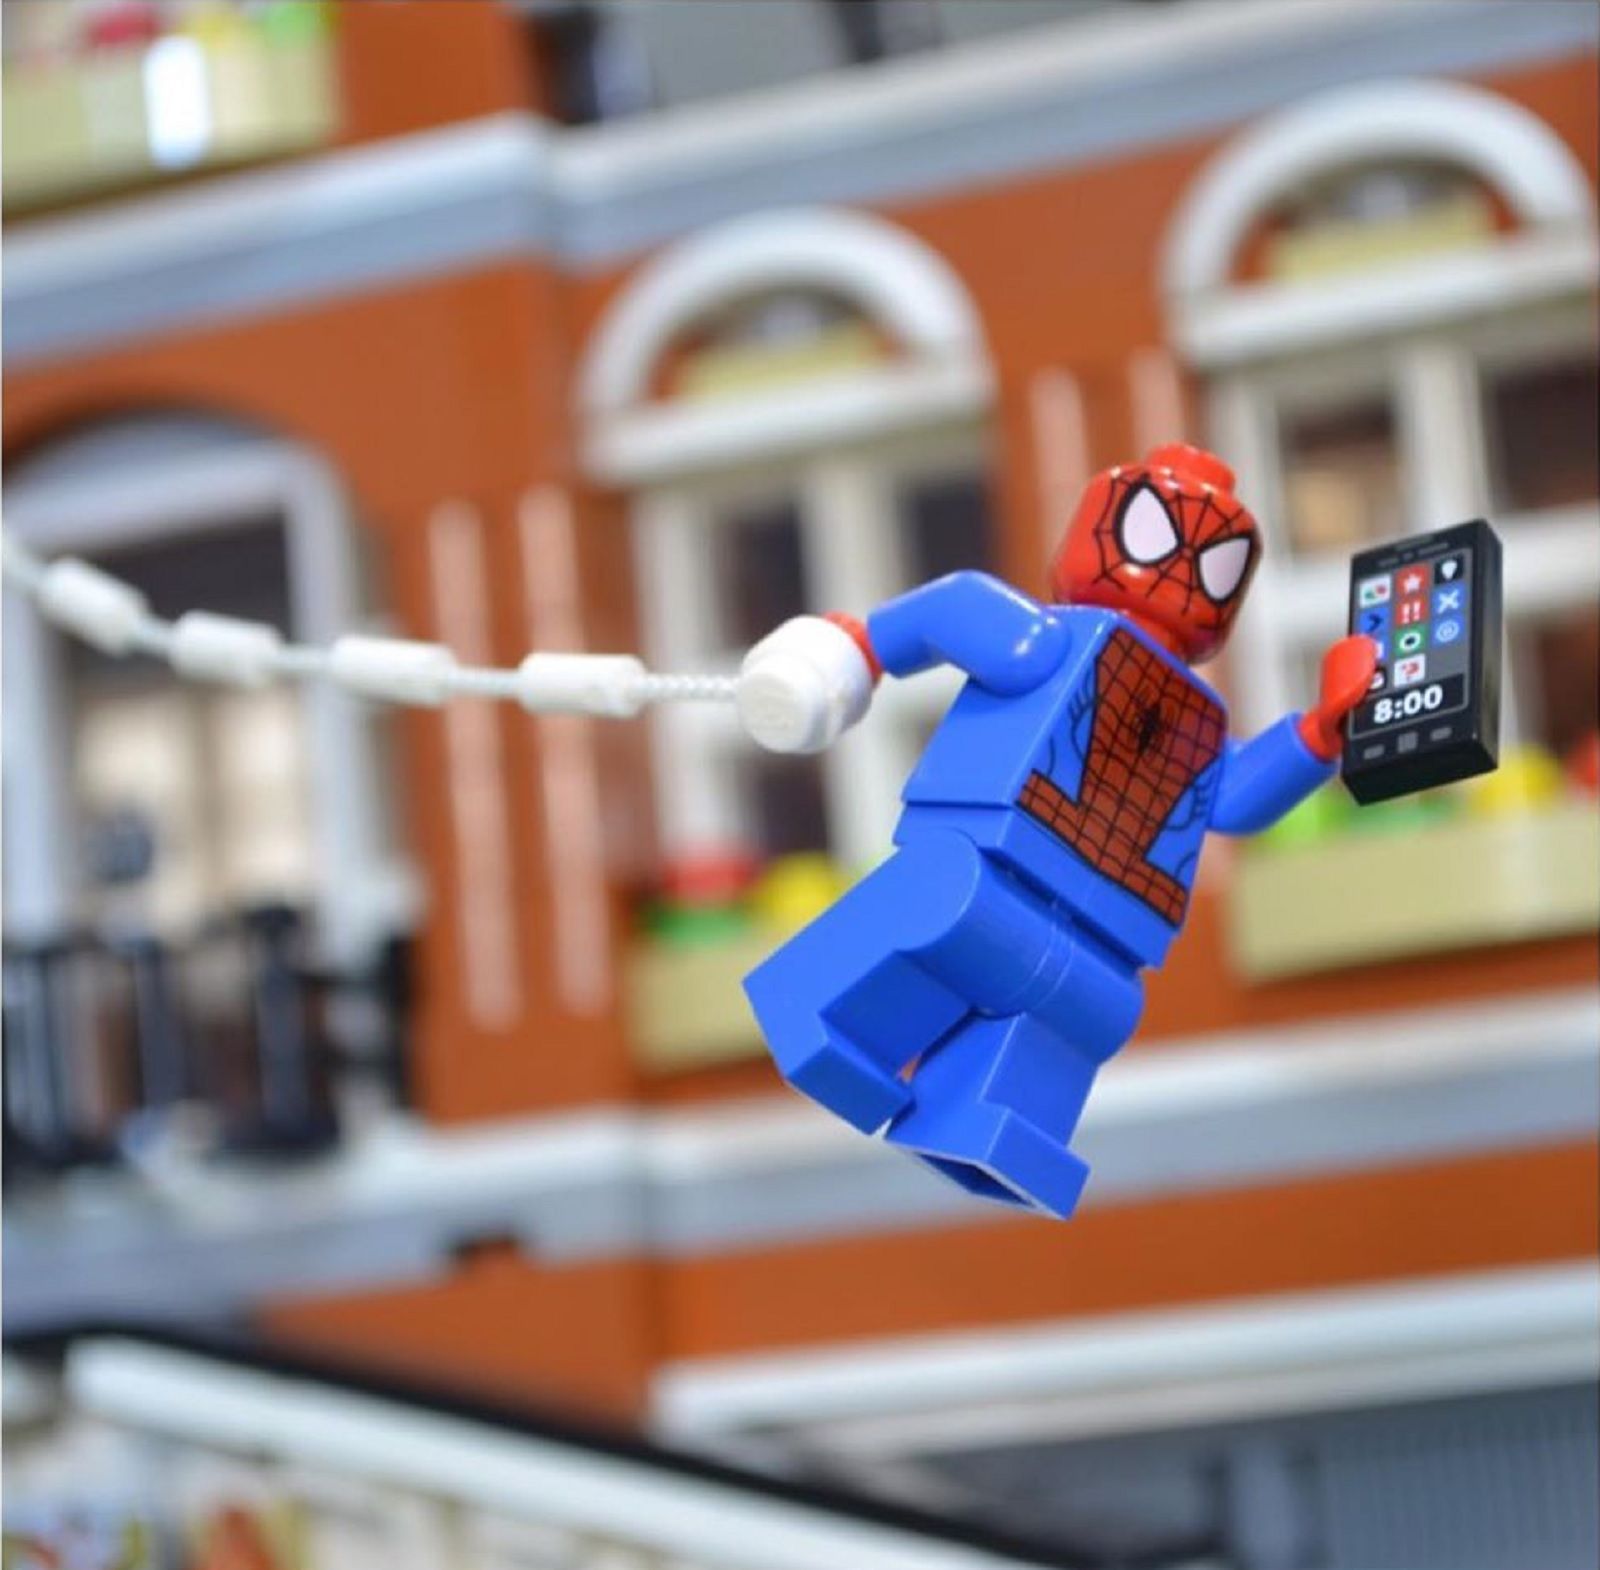 Awesome Lego-themed Instagram Accounts Worth Following image 19